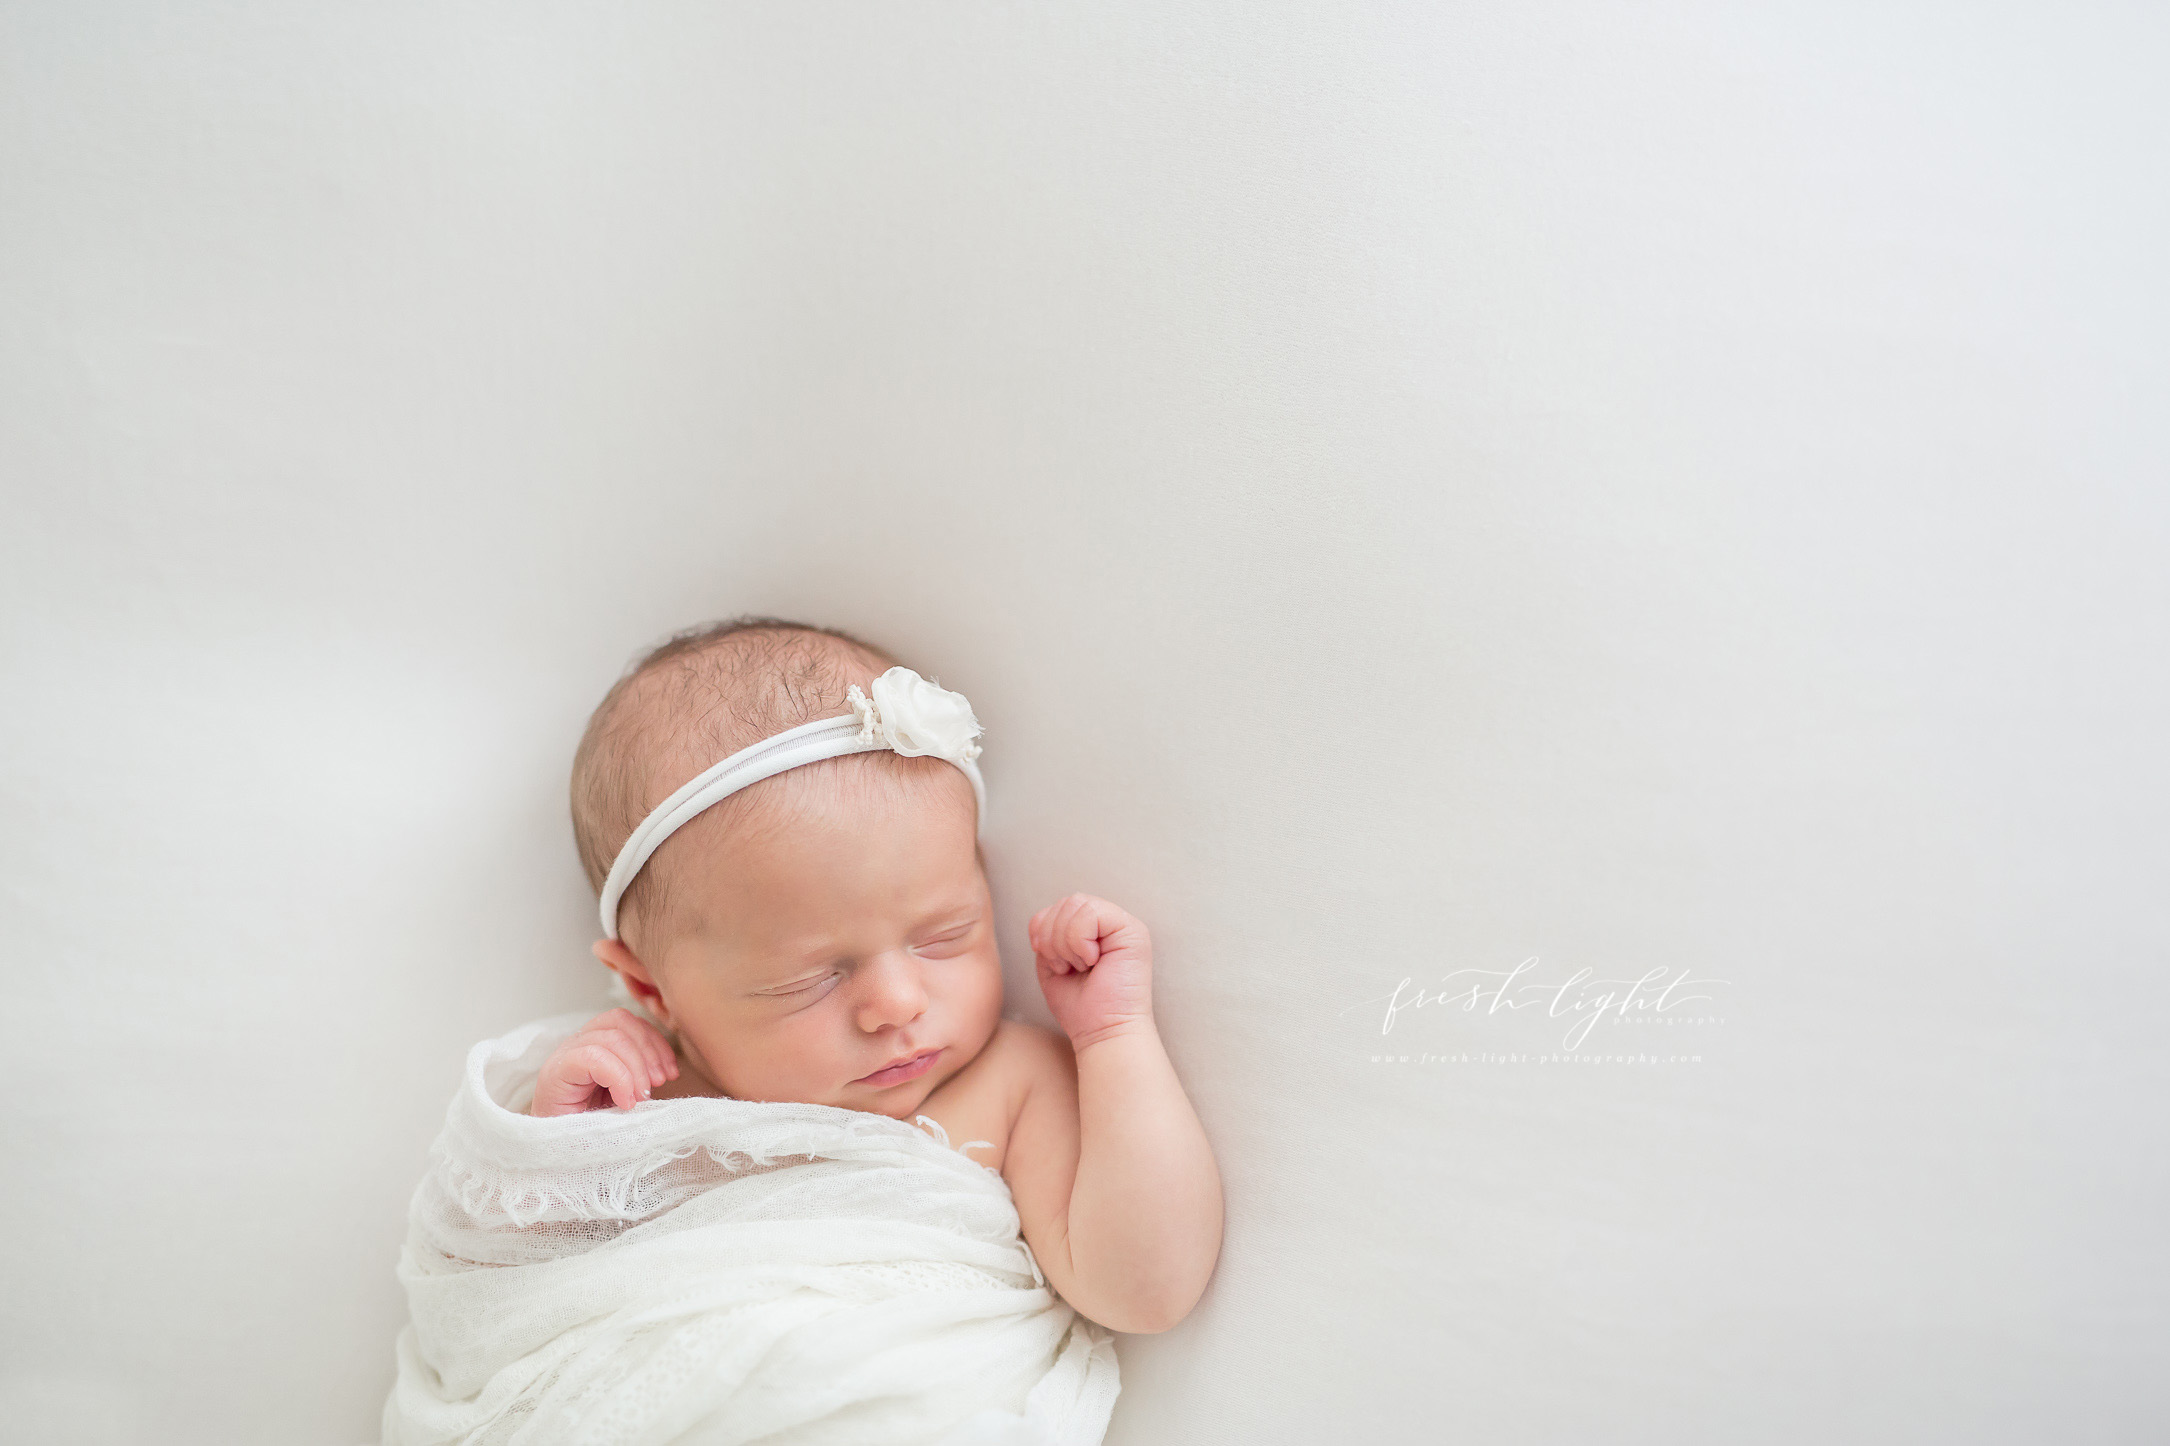 Newborn baby photographed by Fresh Light Photography in Houston